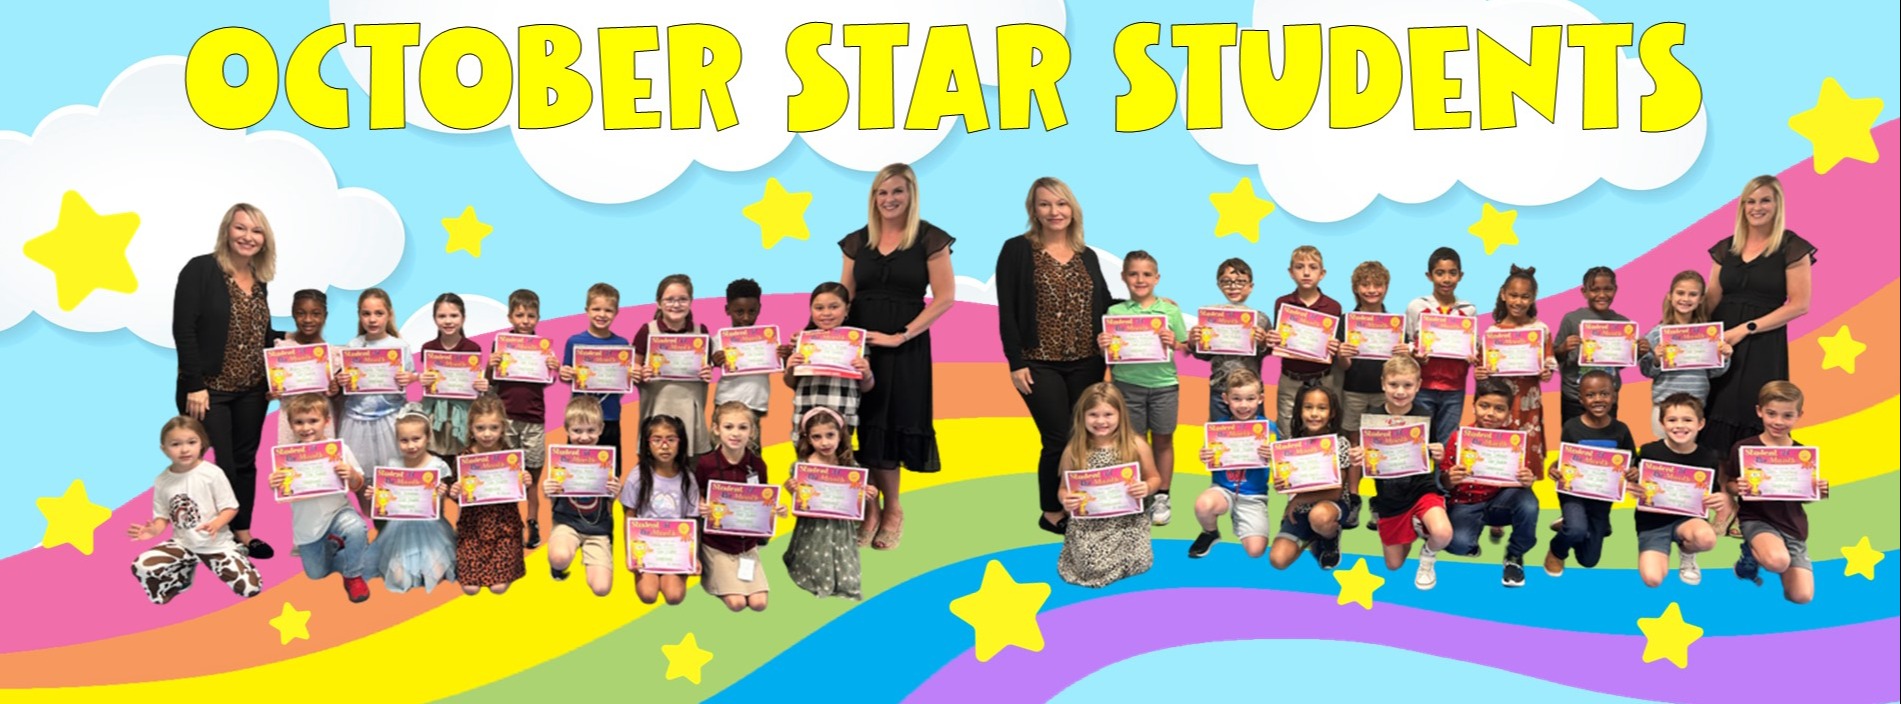 October Star Students